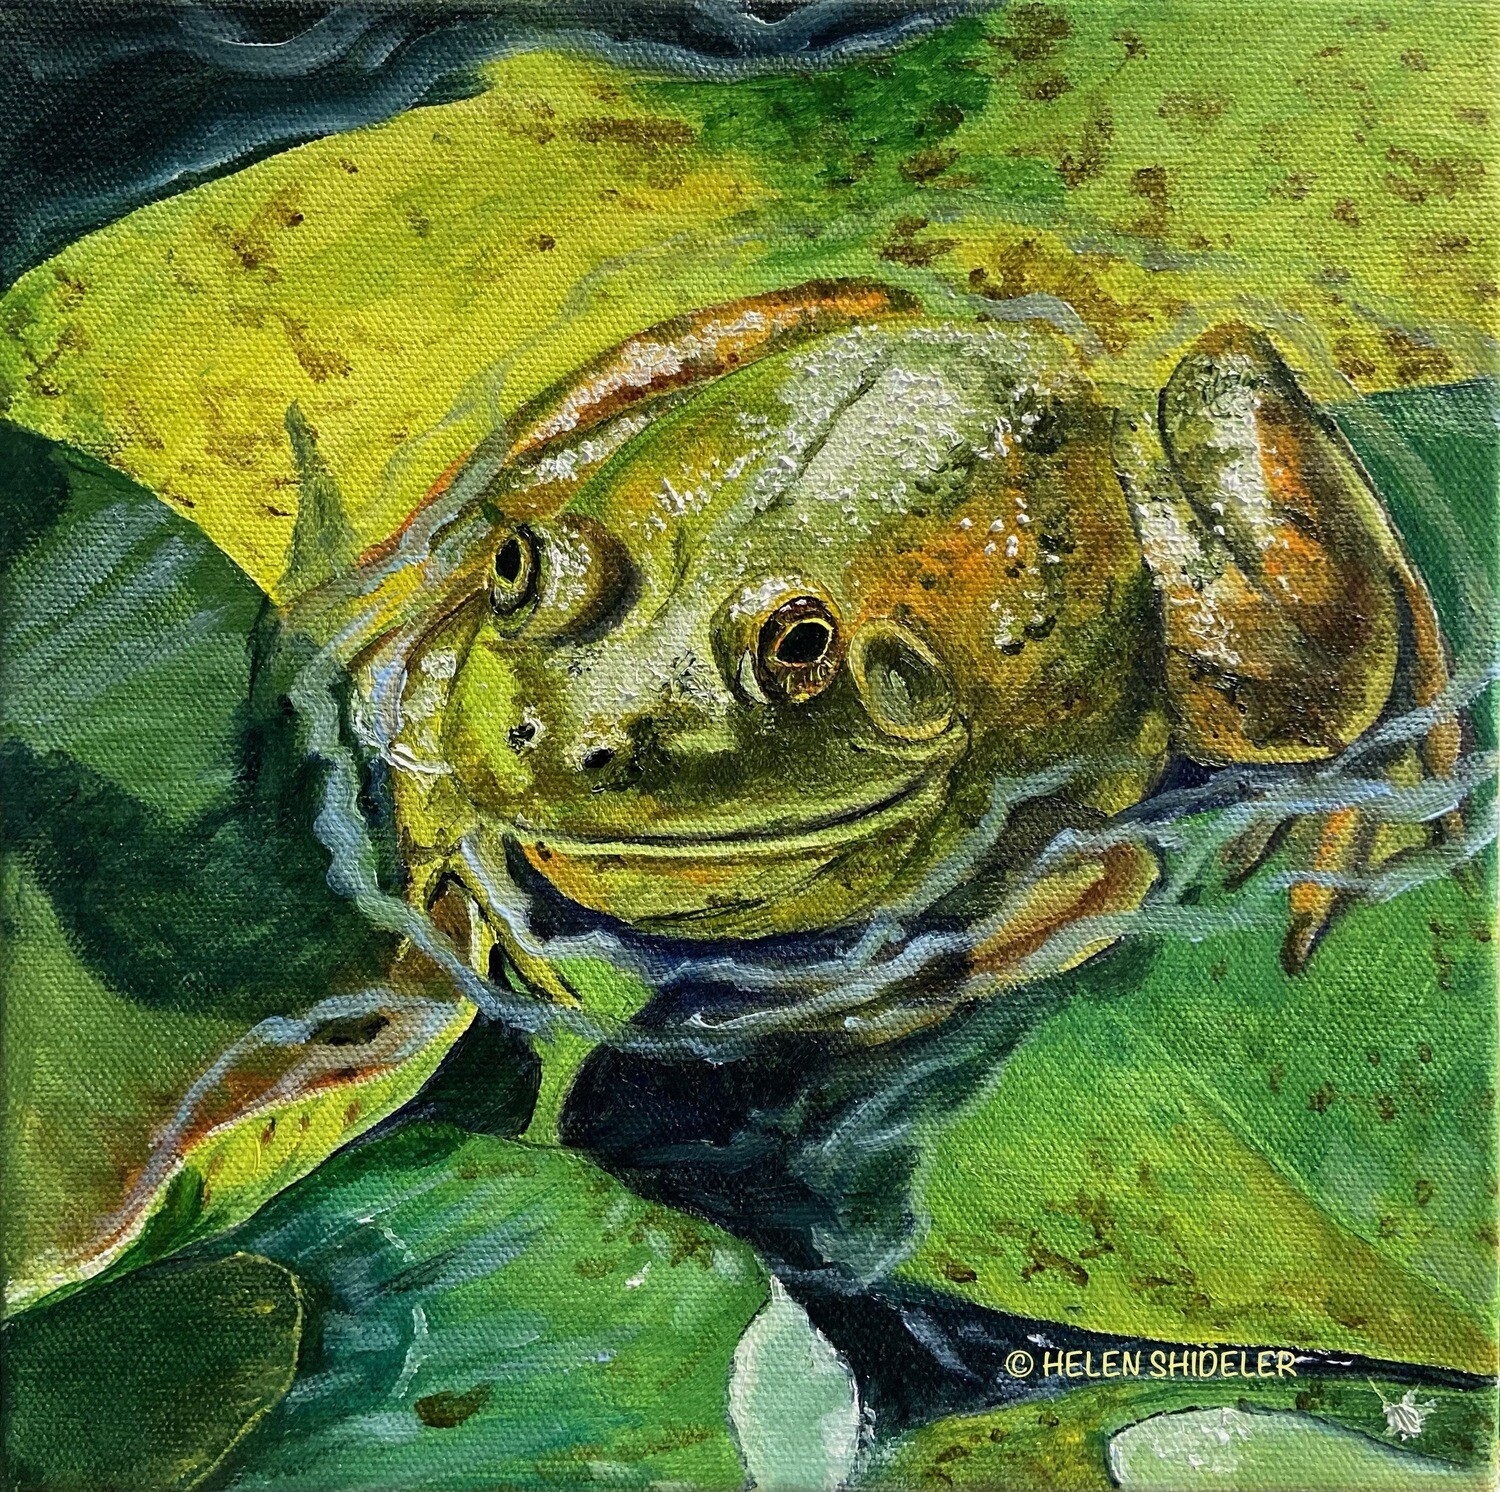 "Waiting For Lunch to Arrive" 10x10" Oil on Canvas